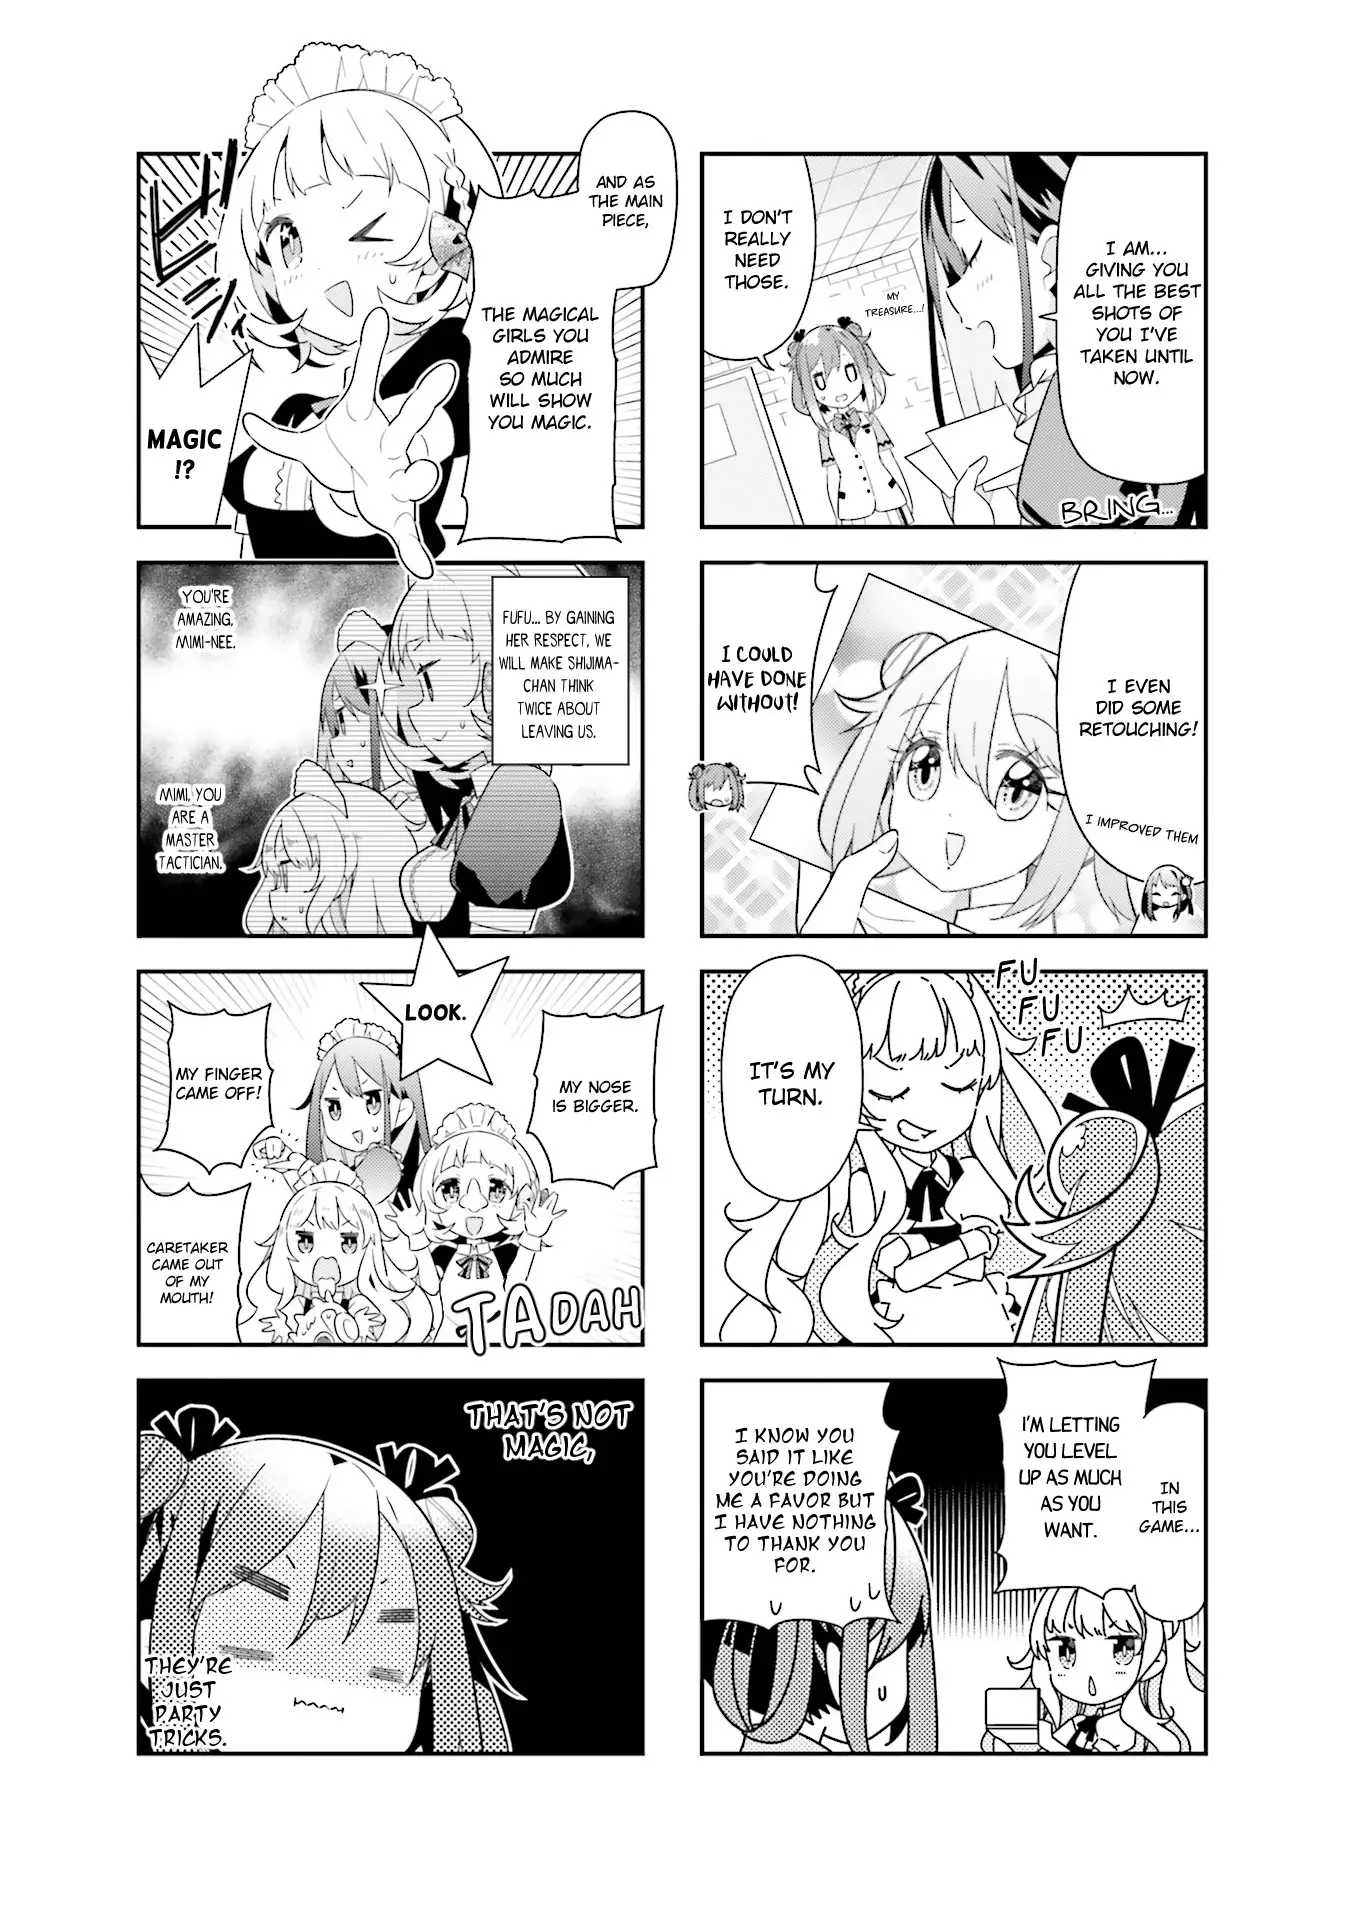 The Life After Retirement Of Magical Girls - 12 page 5-43824b95